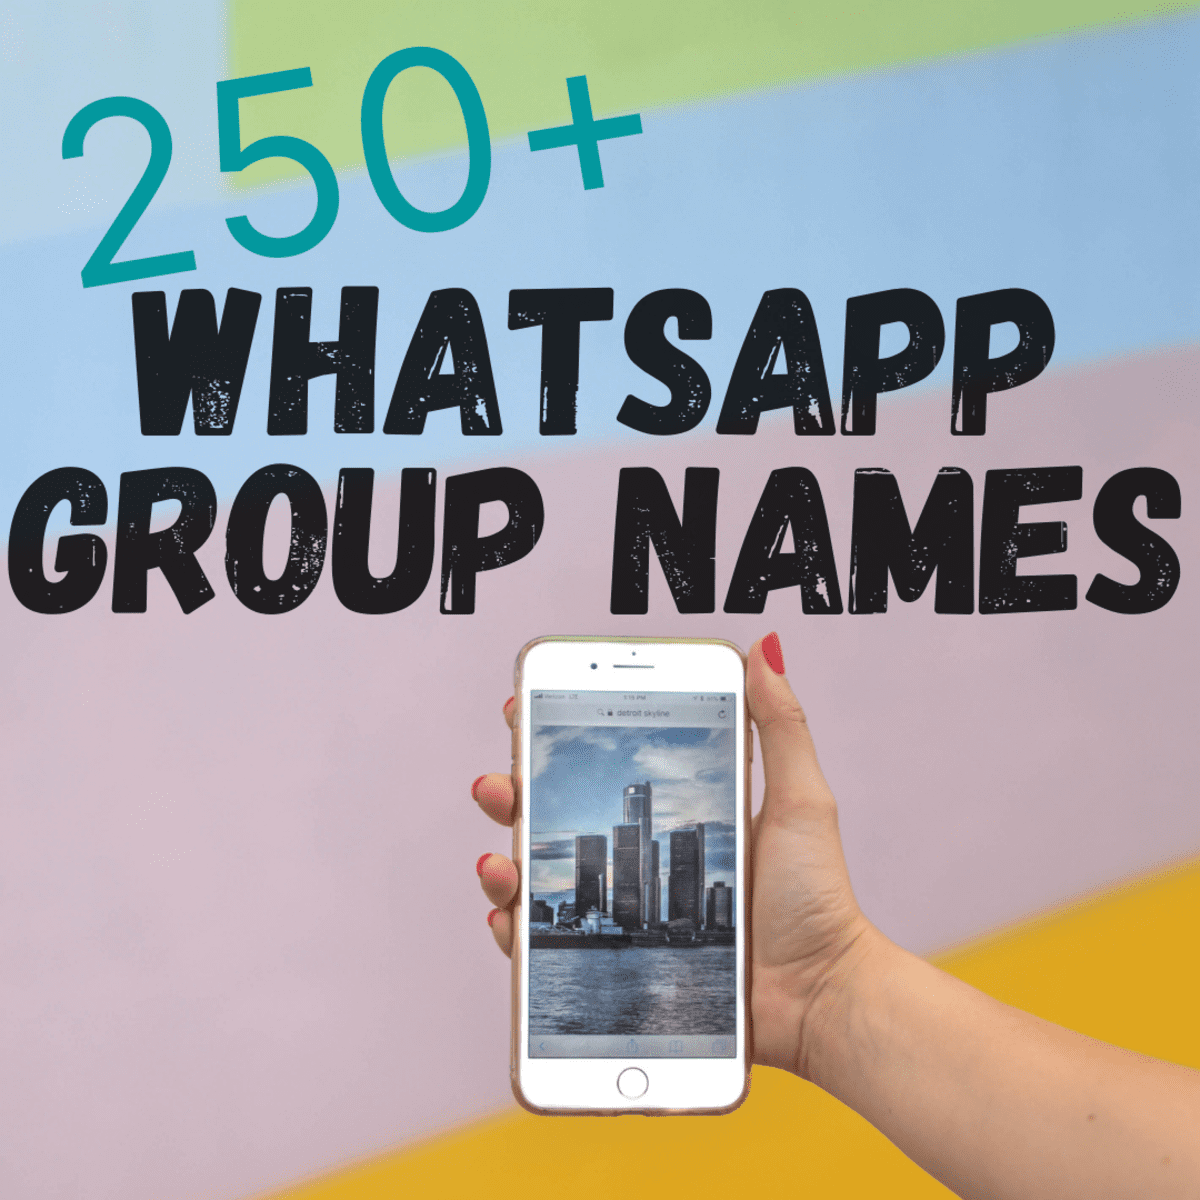 250+ Best WhatsApp Group Names for Friends and Family - TurboFuture